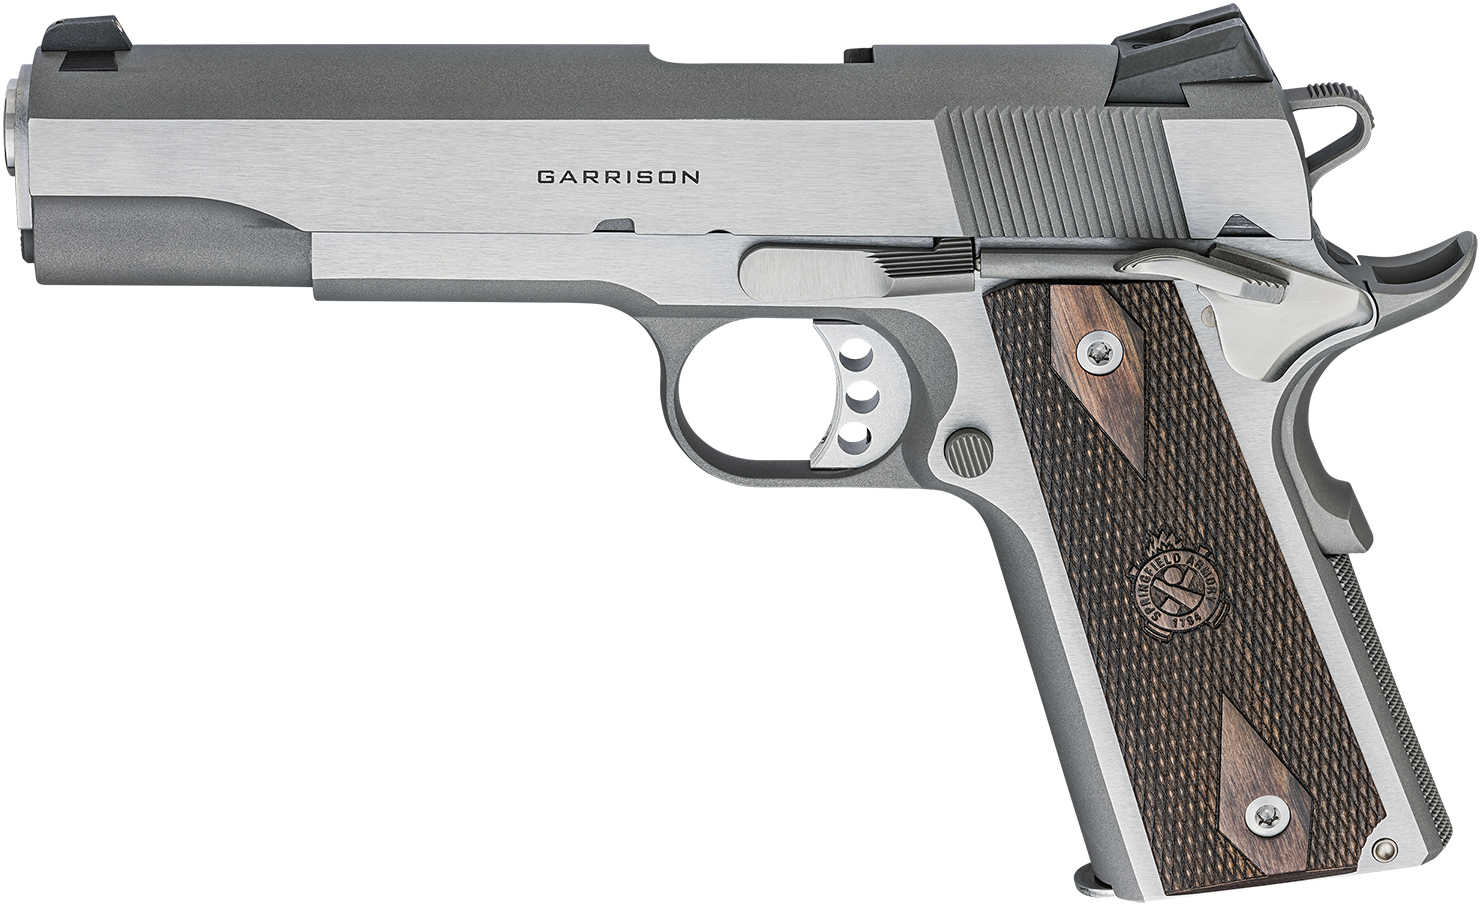 Springfield Armory 1911 Garrison Pistol 9mm Luger 9+1 Rounds 5" Barrel Matte Rust-Resistant Stainless Steel Frame